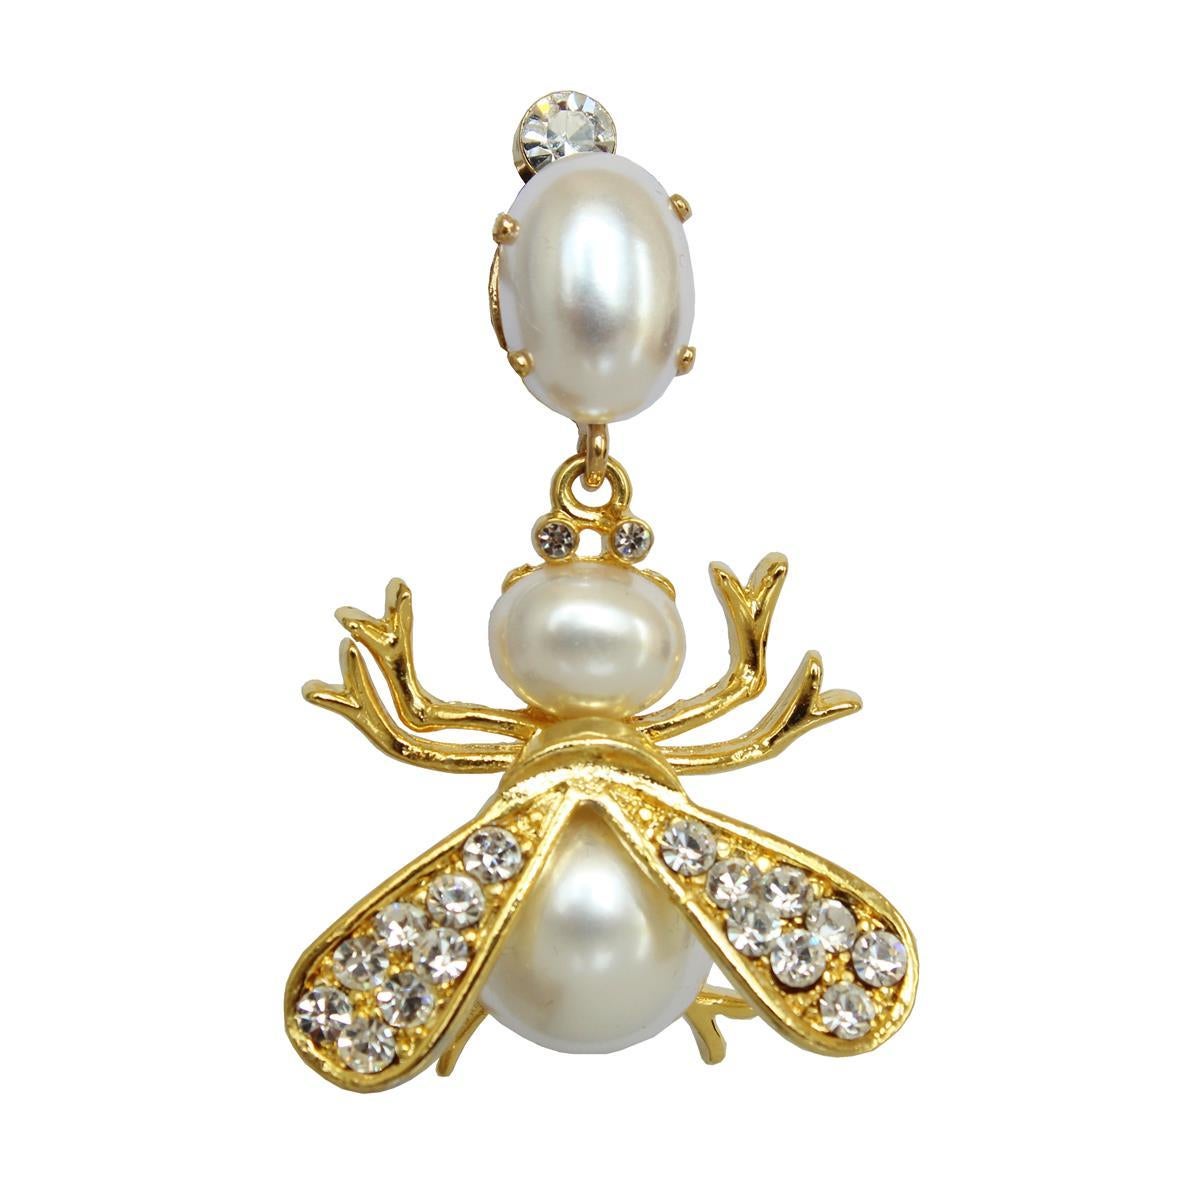 Fantastic masterpiece by Carlo Zini
One of the world greatest bijoux designers
Non allergenic rhodium
18 KT gold dipped
Faux pearls
Swarovski crystals
Clip on closure, pierced on request
100% Artisanal work
Made in Milano
Worldwide express shipping